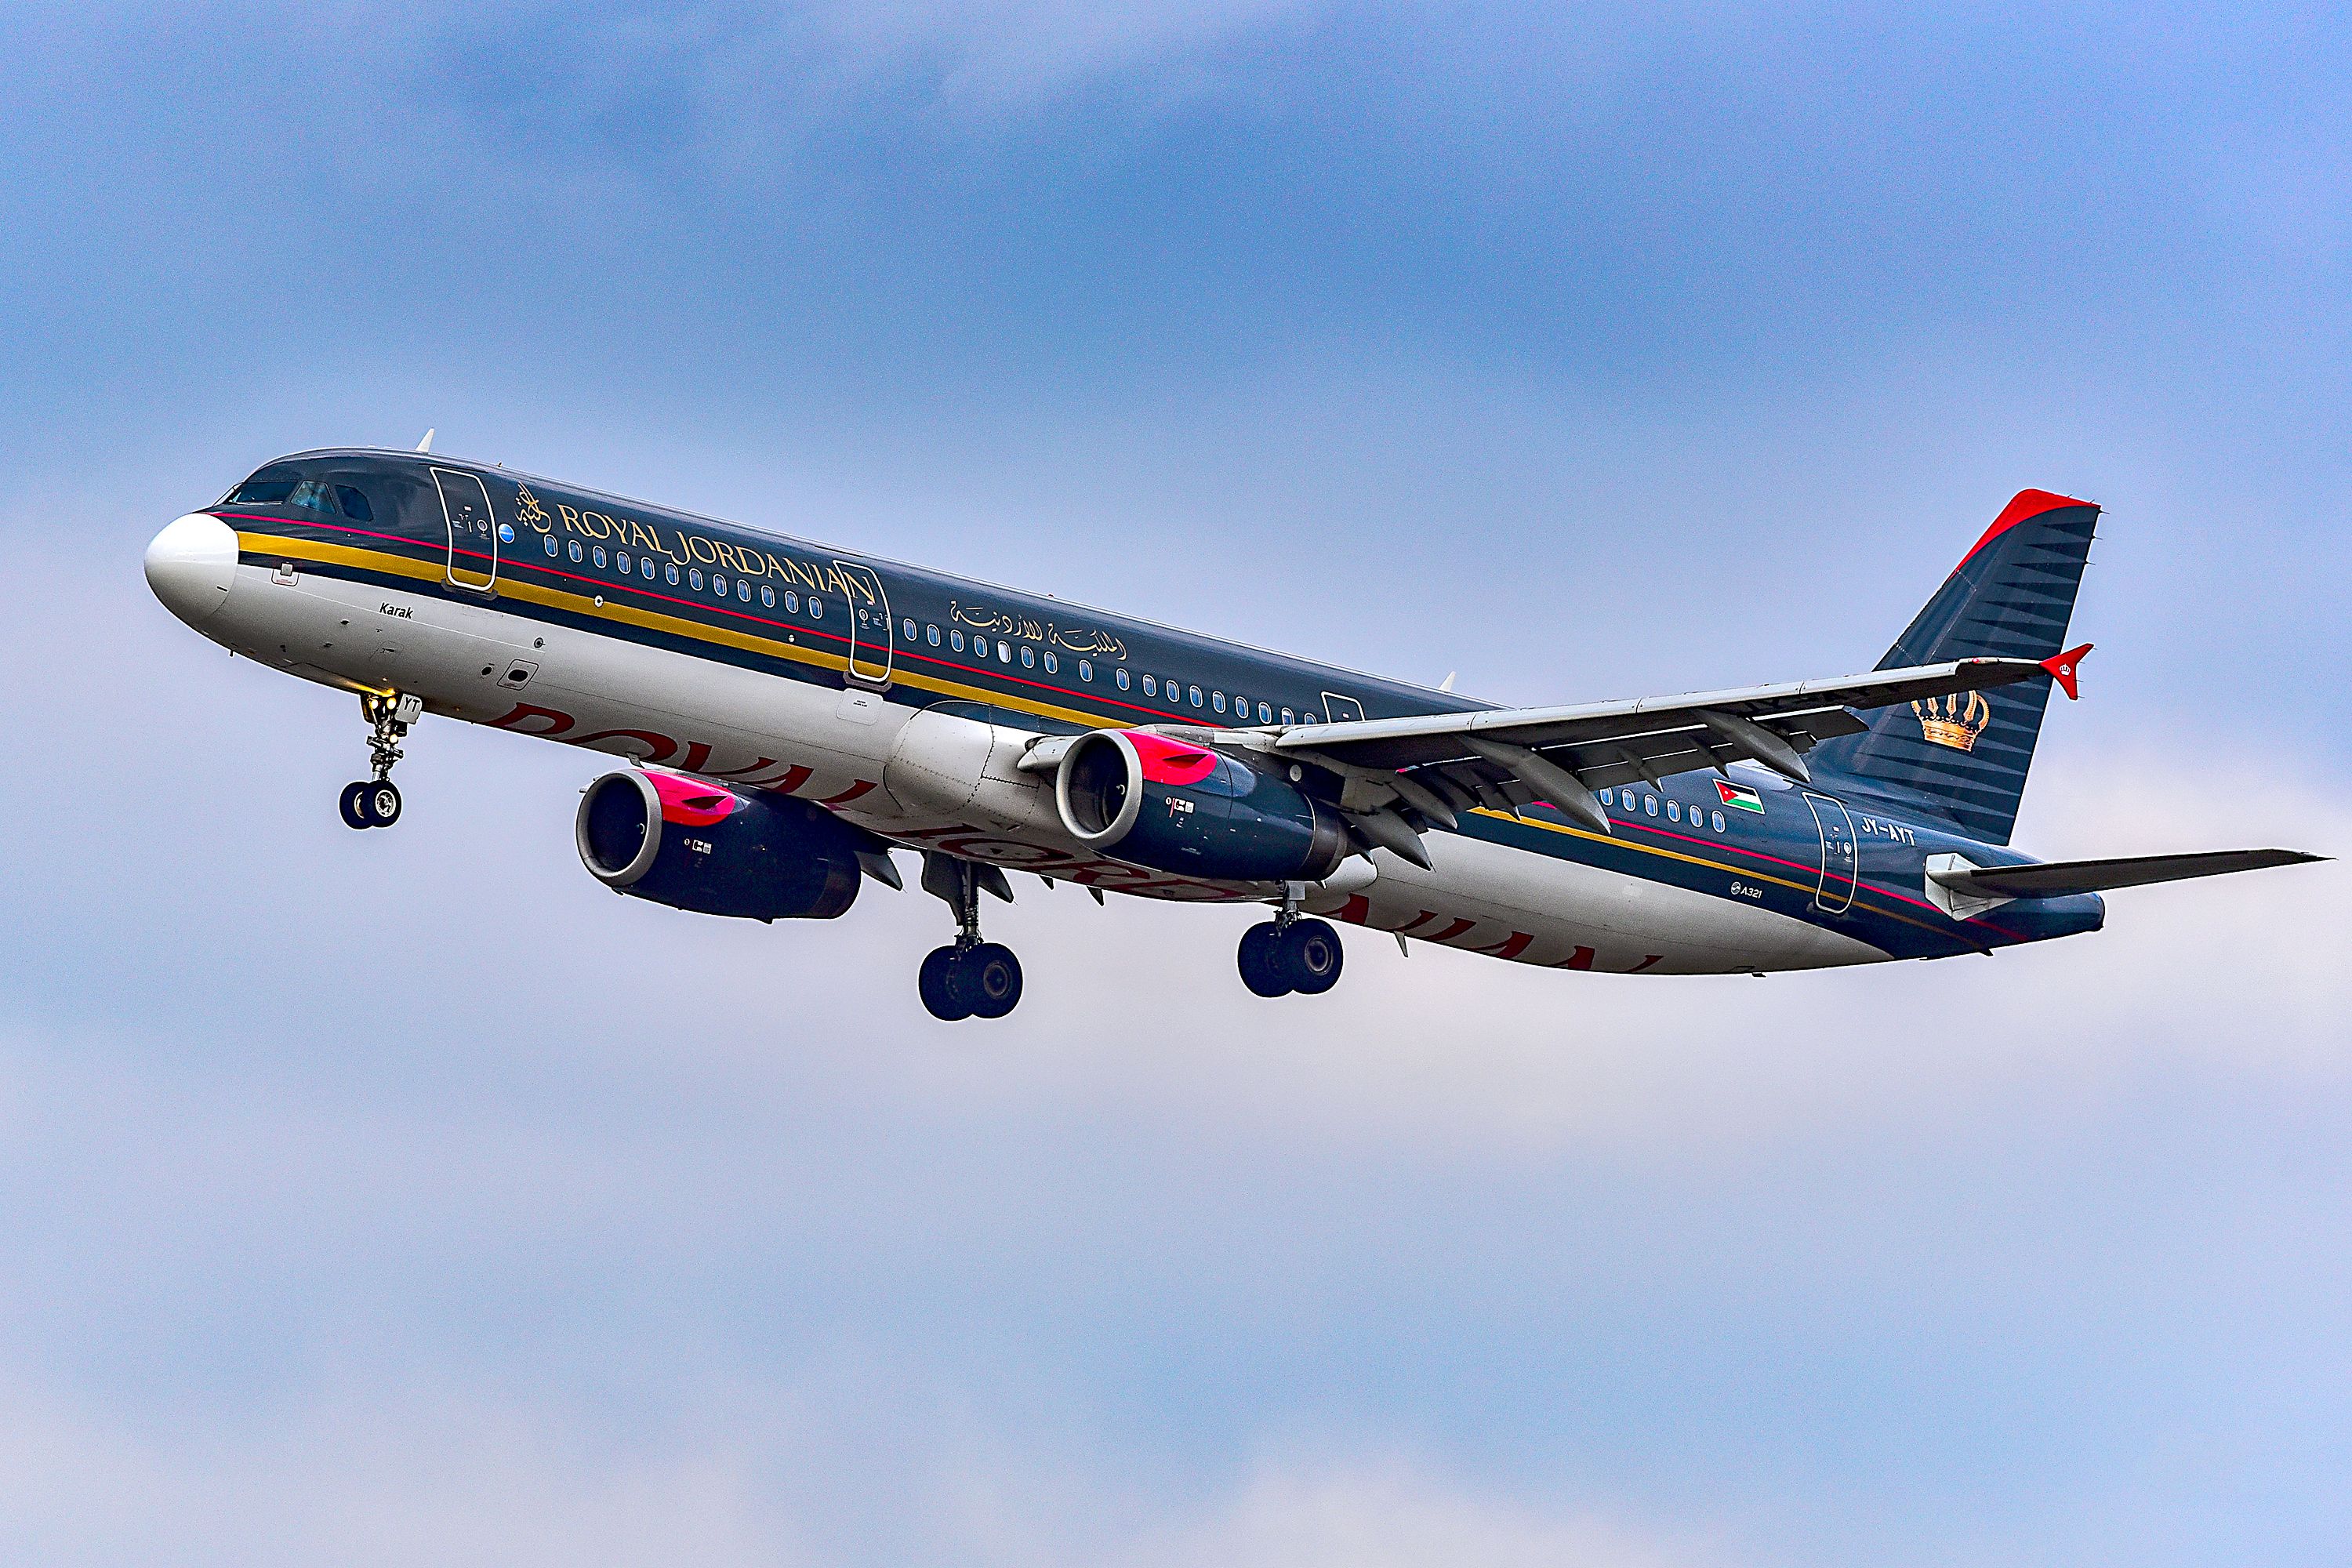 A Royal Jordanian Airbus A321 Flying in the sky.